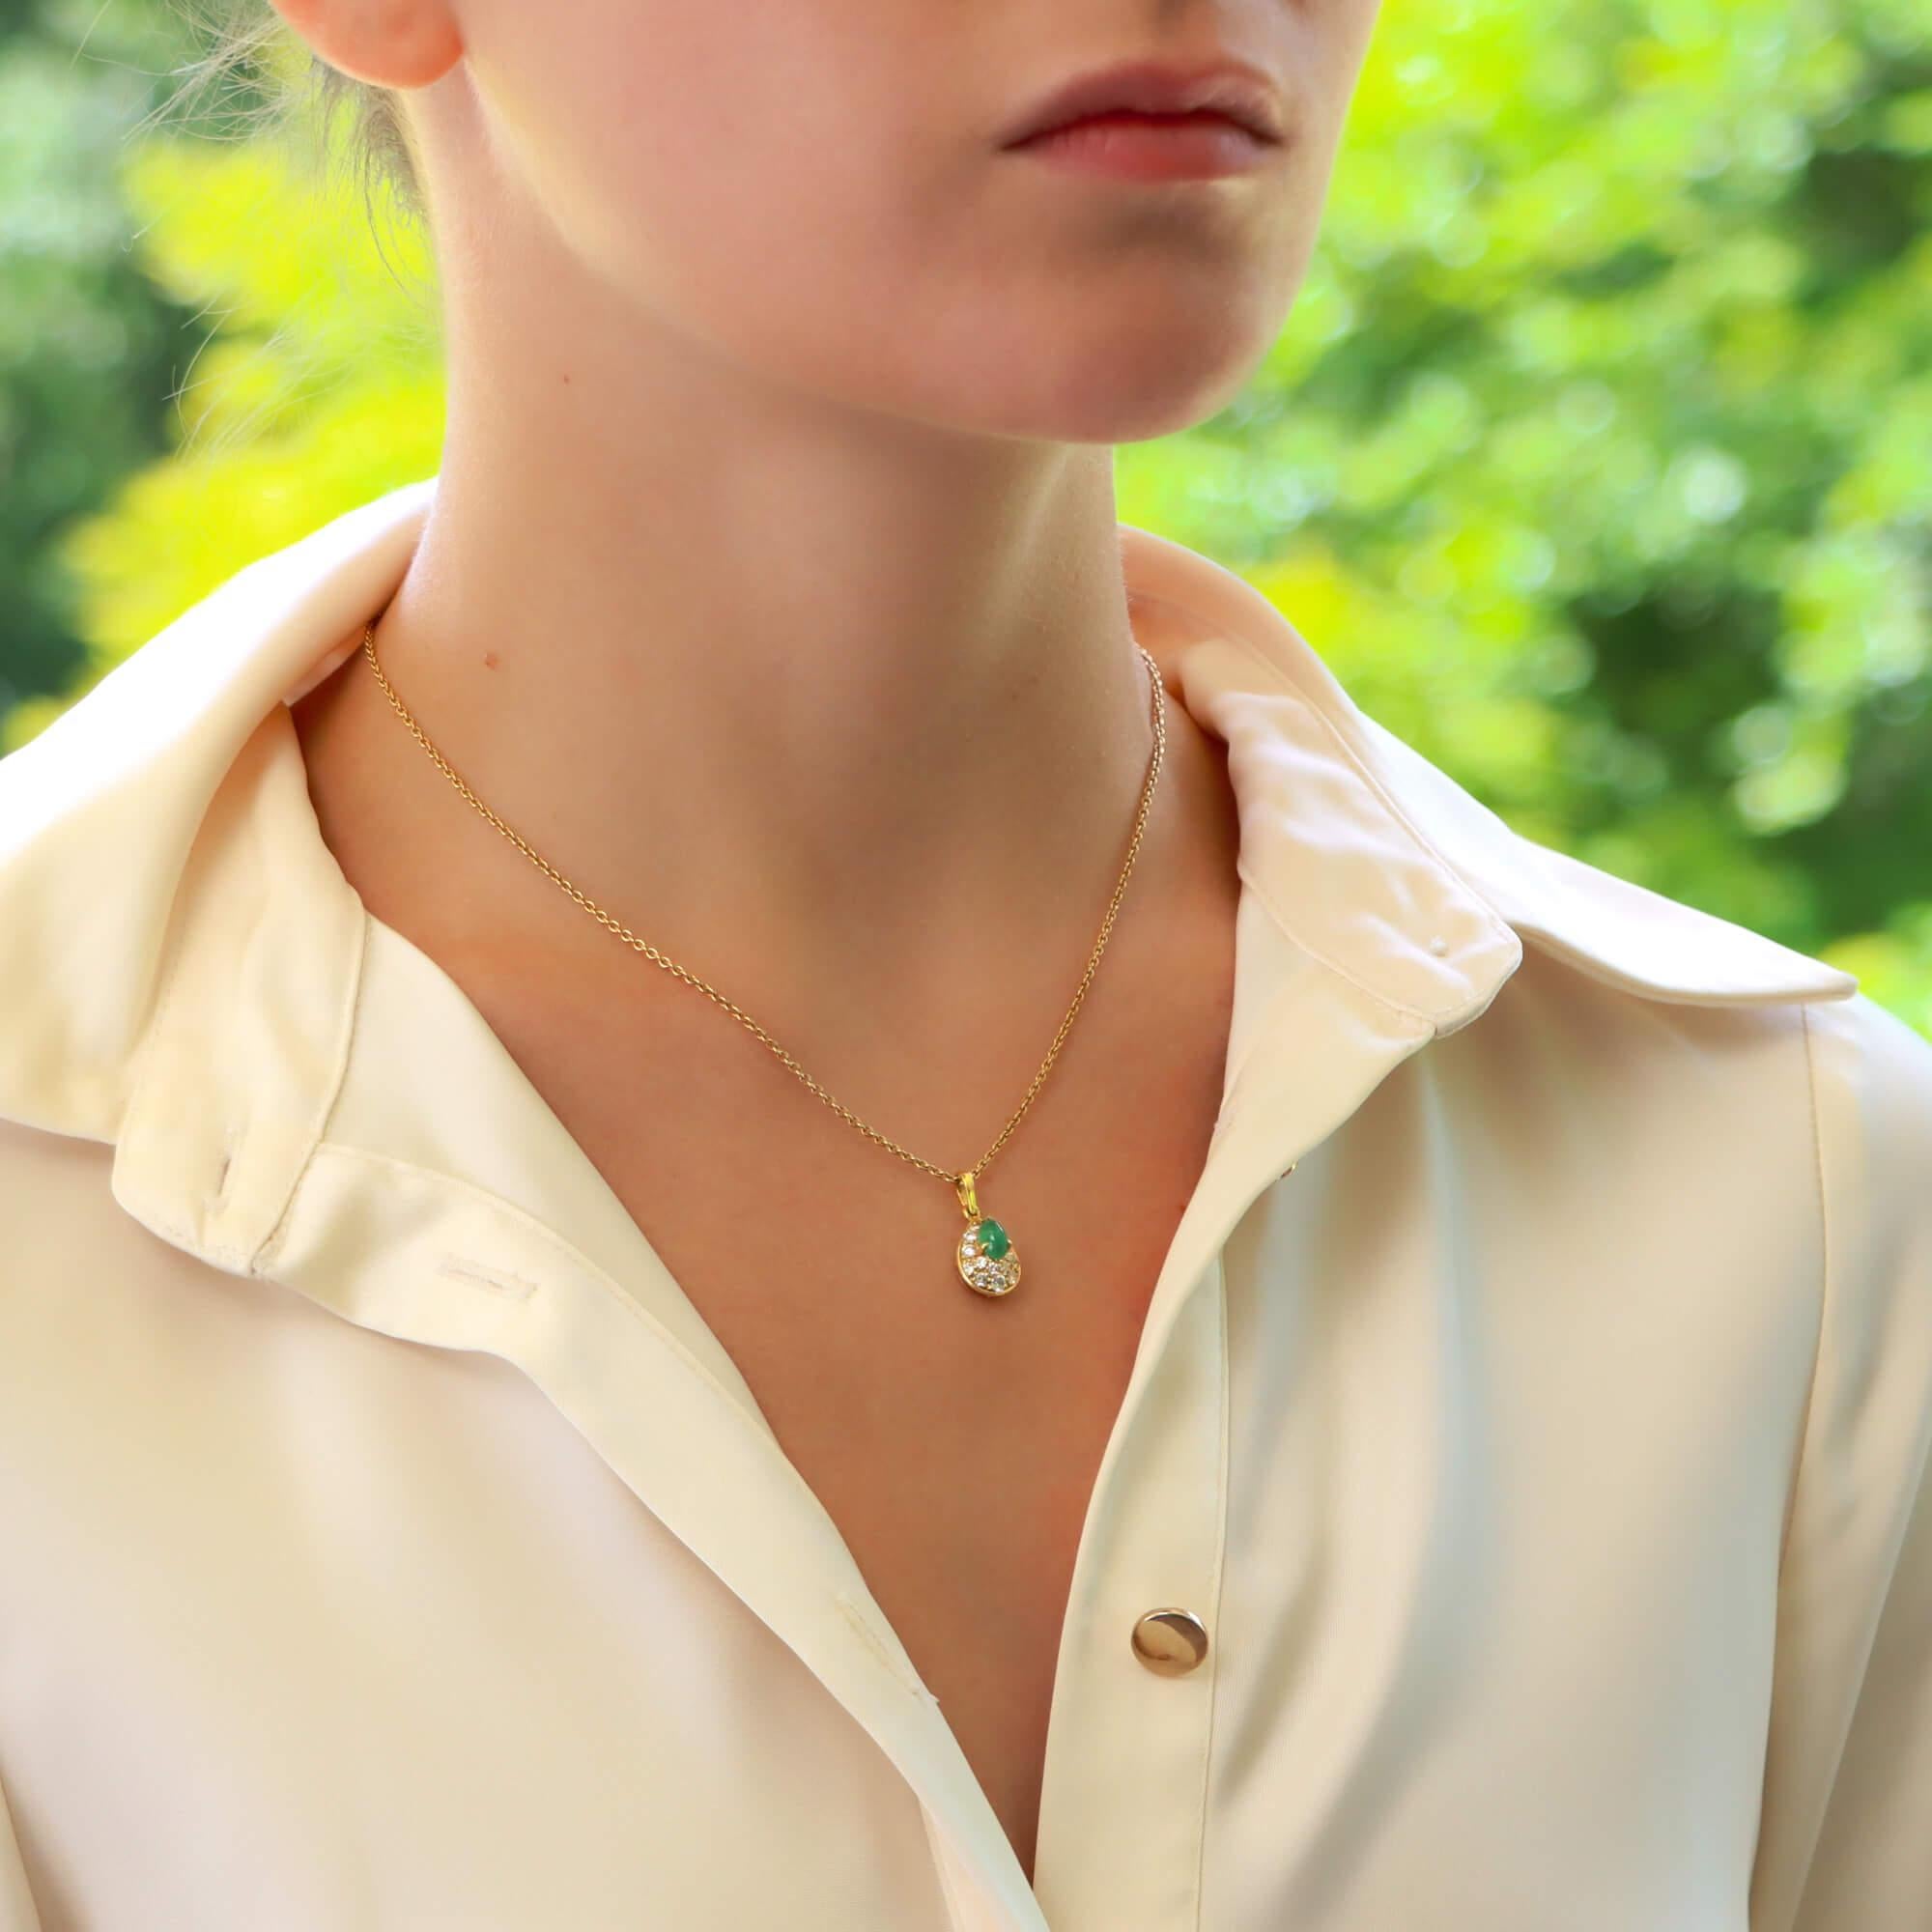 A beautiful vintage Van Cleef & Arpels chrysoprase and diamond pendant set in 18k yellow gold.

The pendant is set in an elegant tear drop shape, pave set with sparkly round brilliant cut diamonds and a cabochon chrysoprase stone. The central